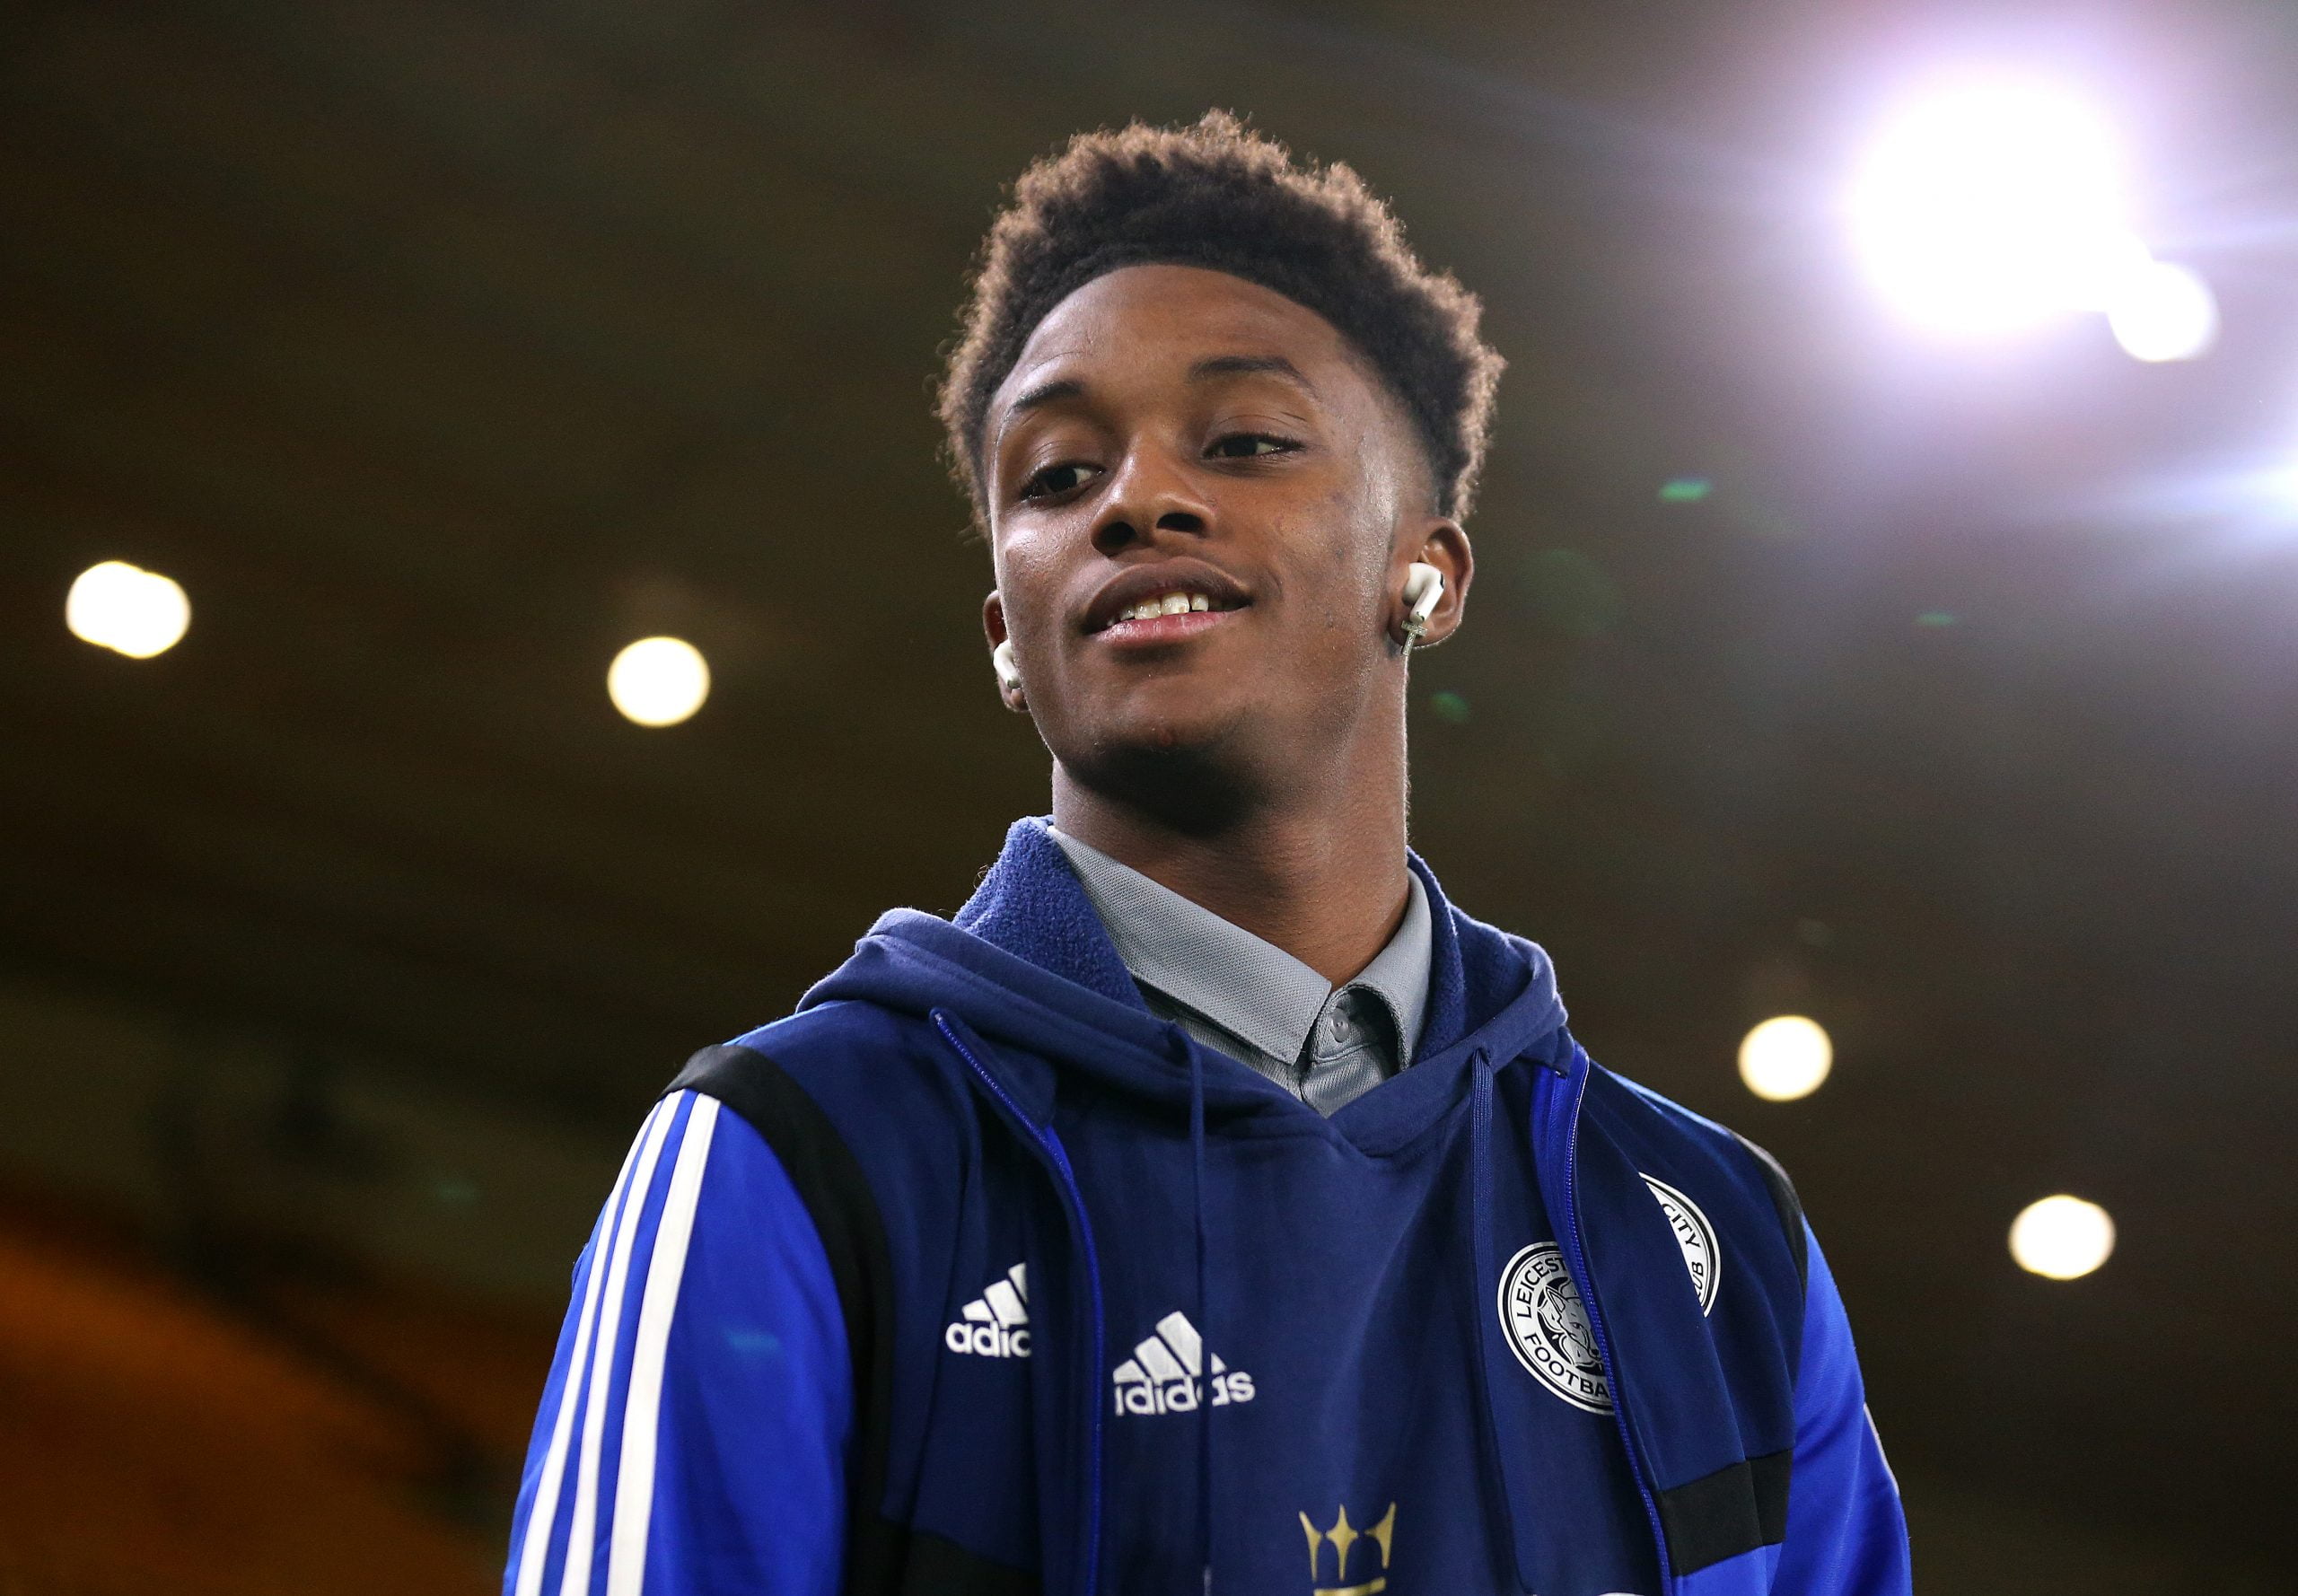 Everton could face heavy competition in pursuit of Demarai Gray who is seen in the picture